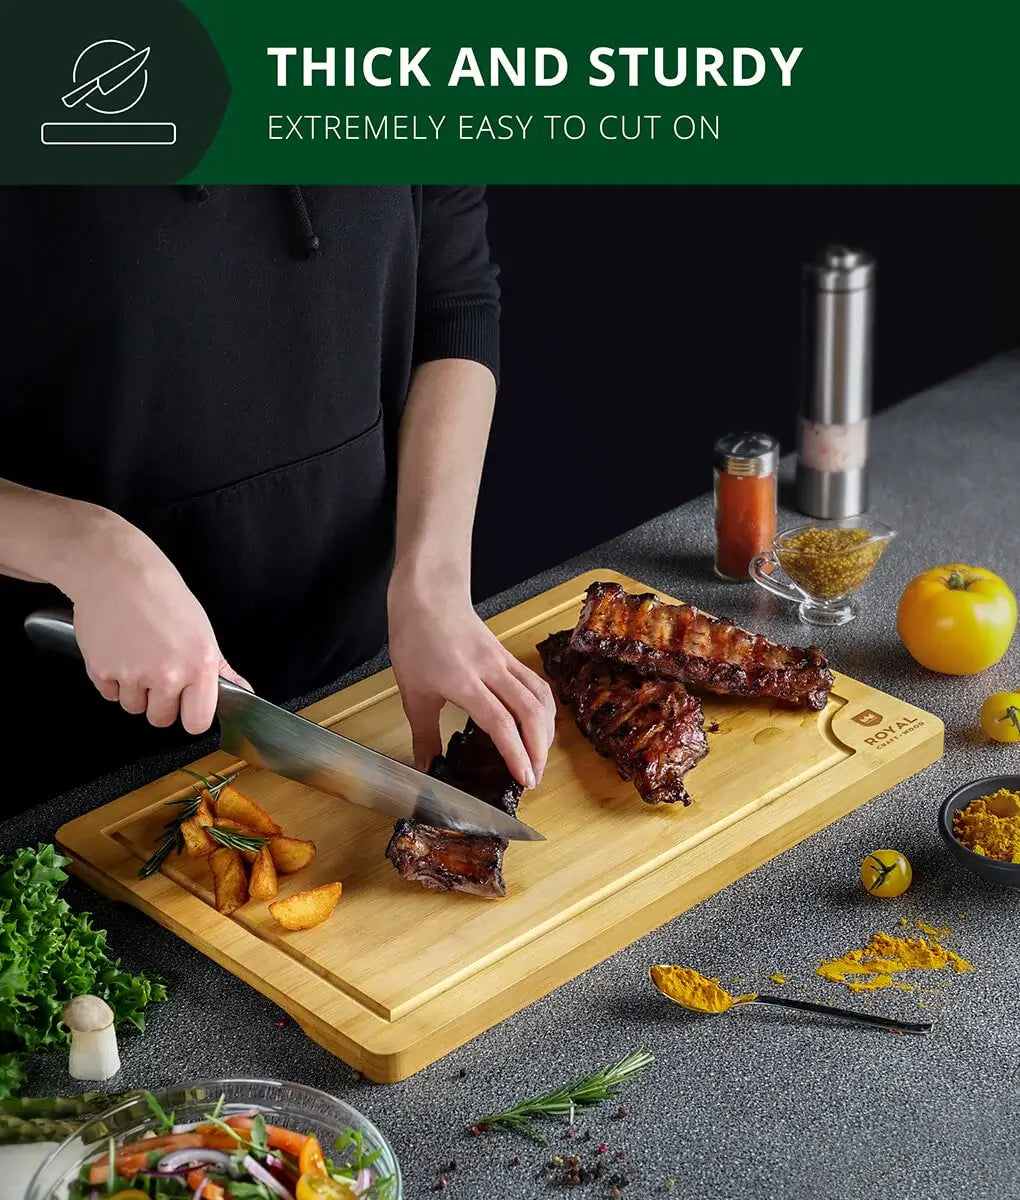 Royal Craft Wood Bamboo Cutting Board for Kitchen with Juice Groove